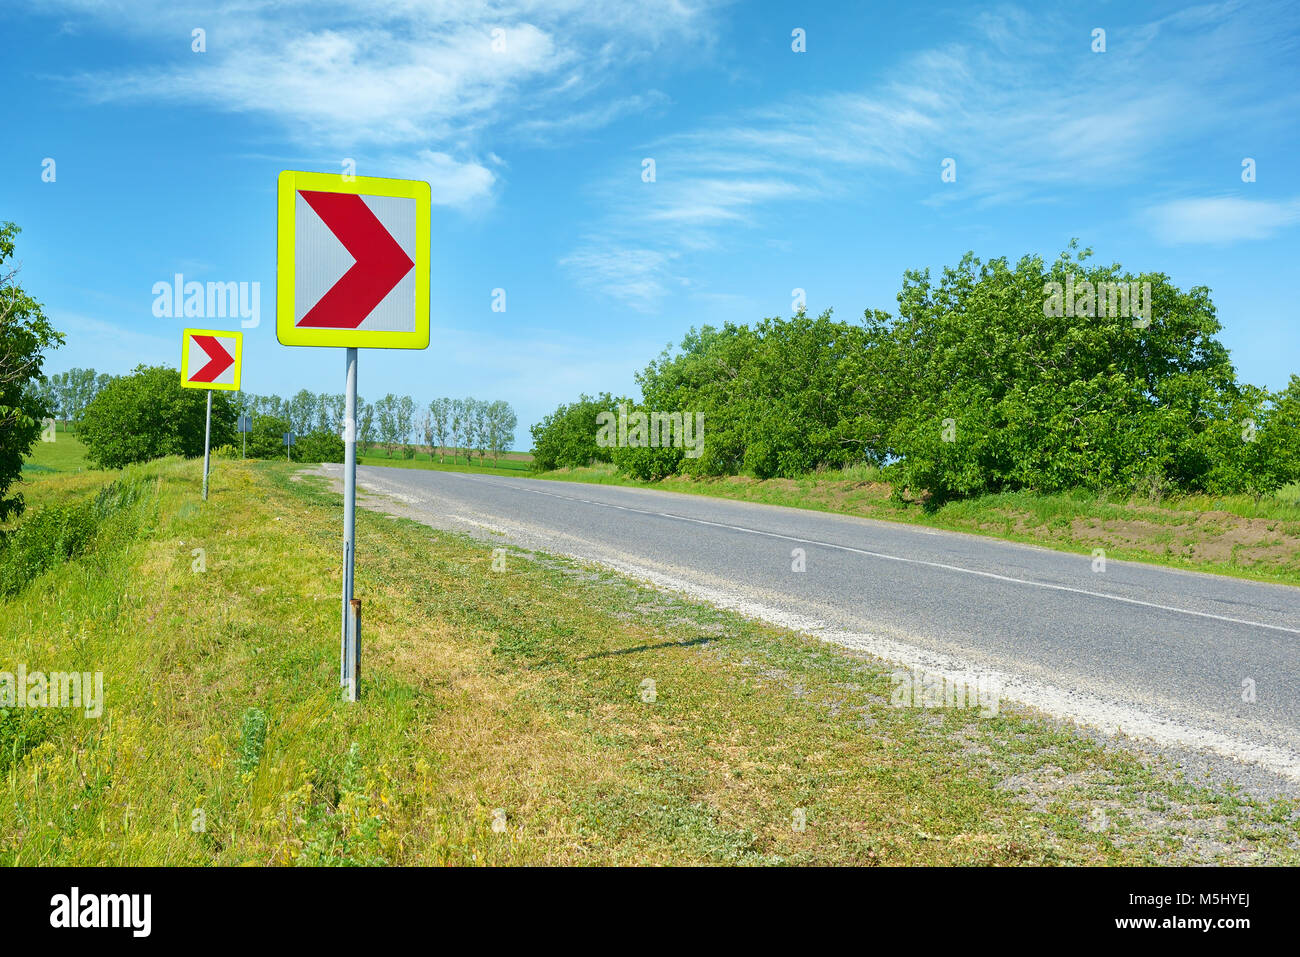 Warning signs for dangerous turn on country road. Stock Photo